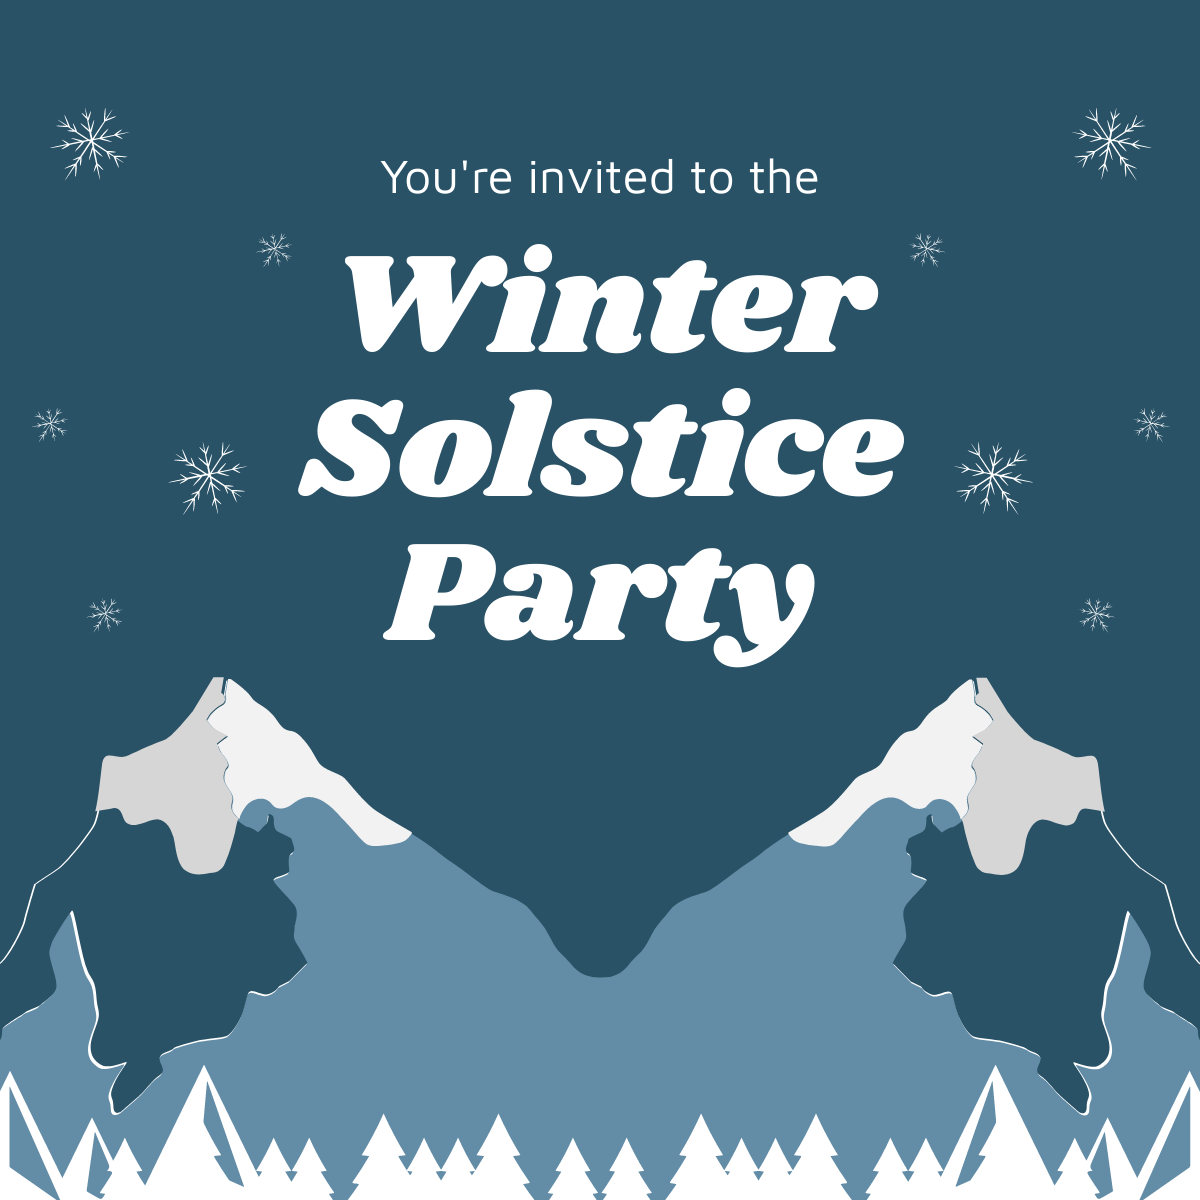 Winter Solstice Party LinkedIn Post Template